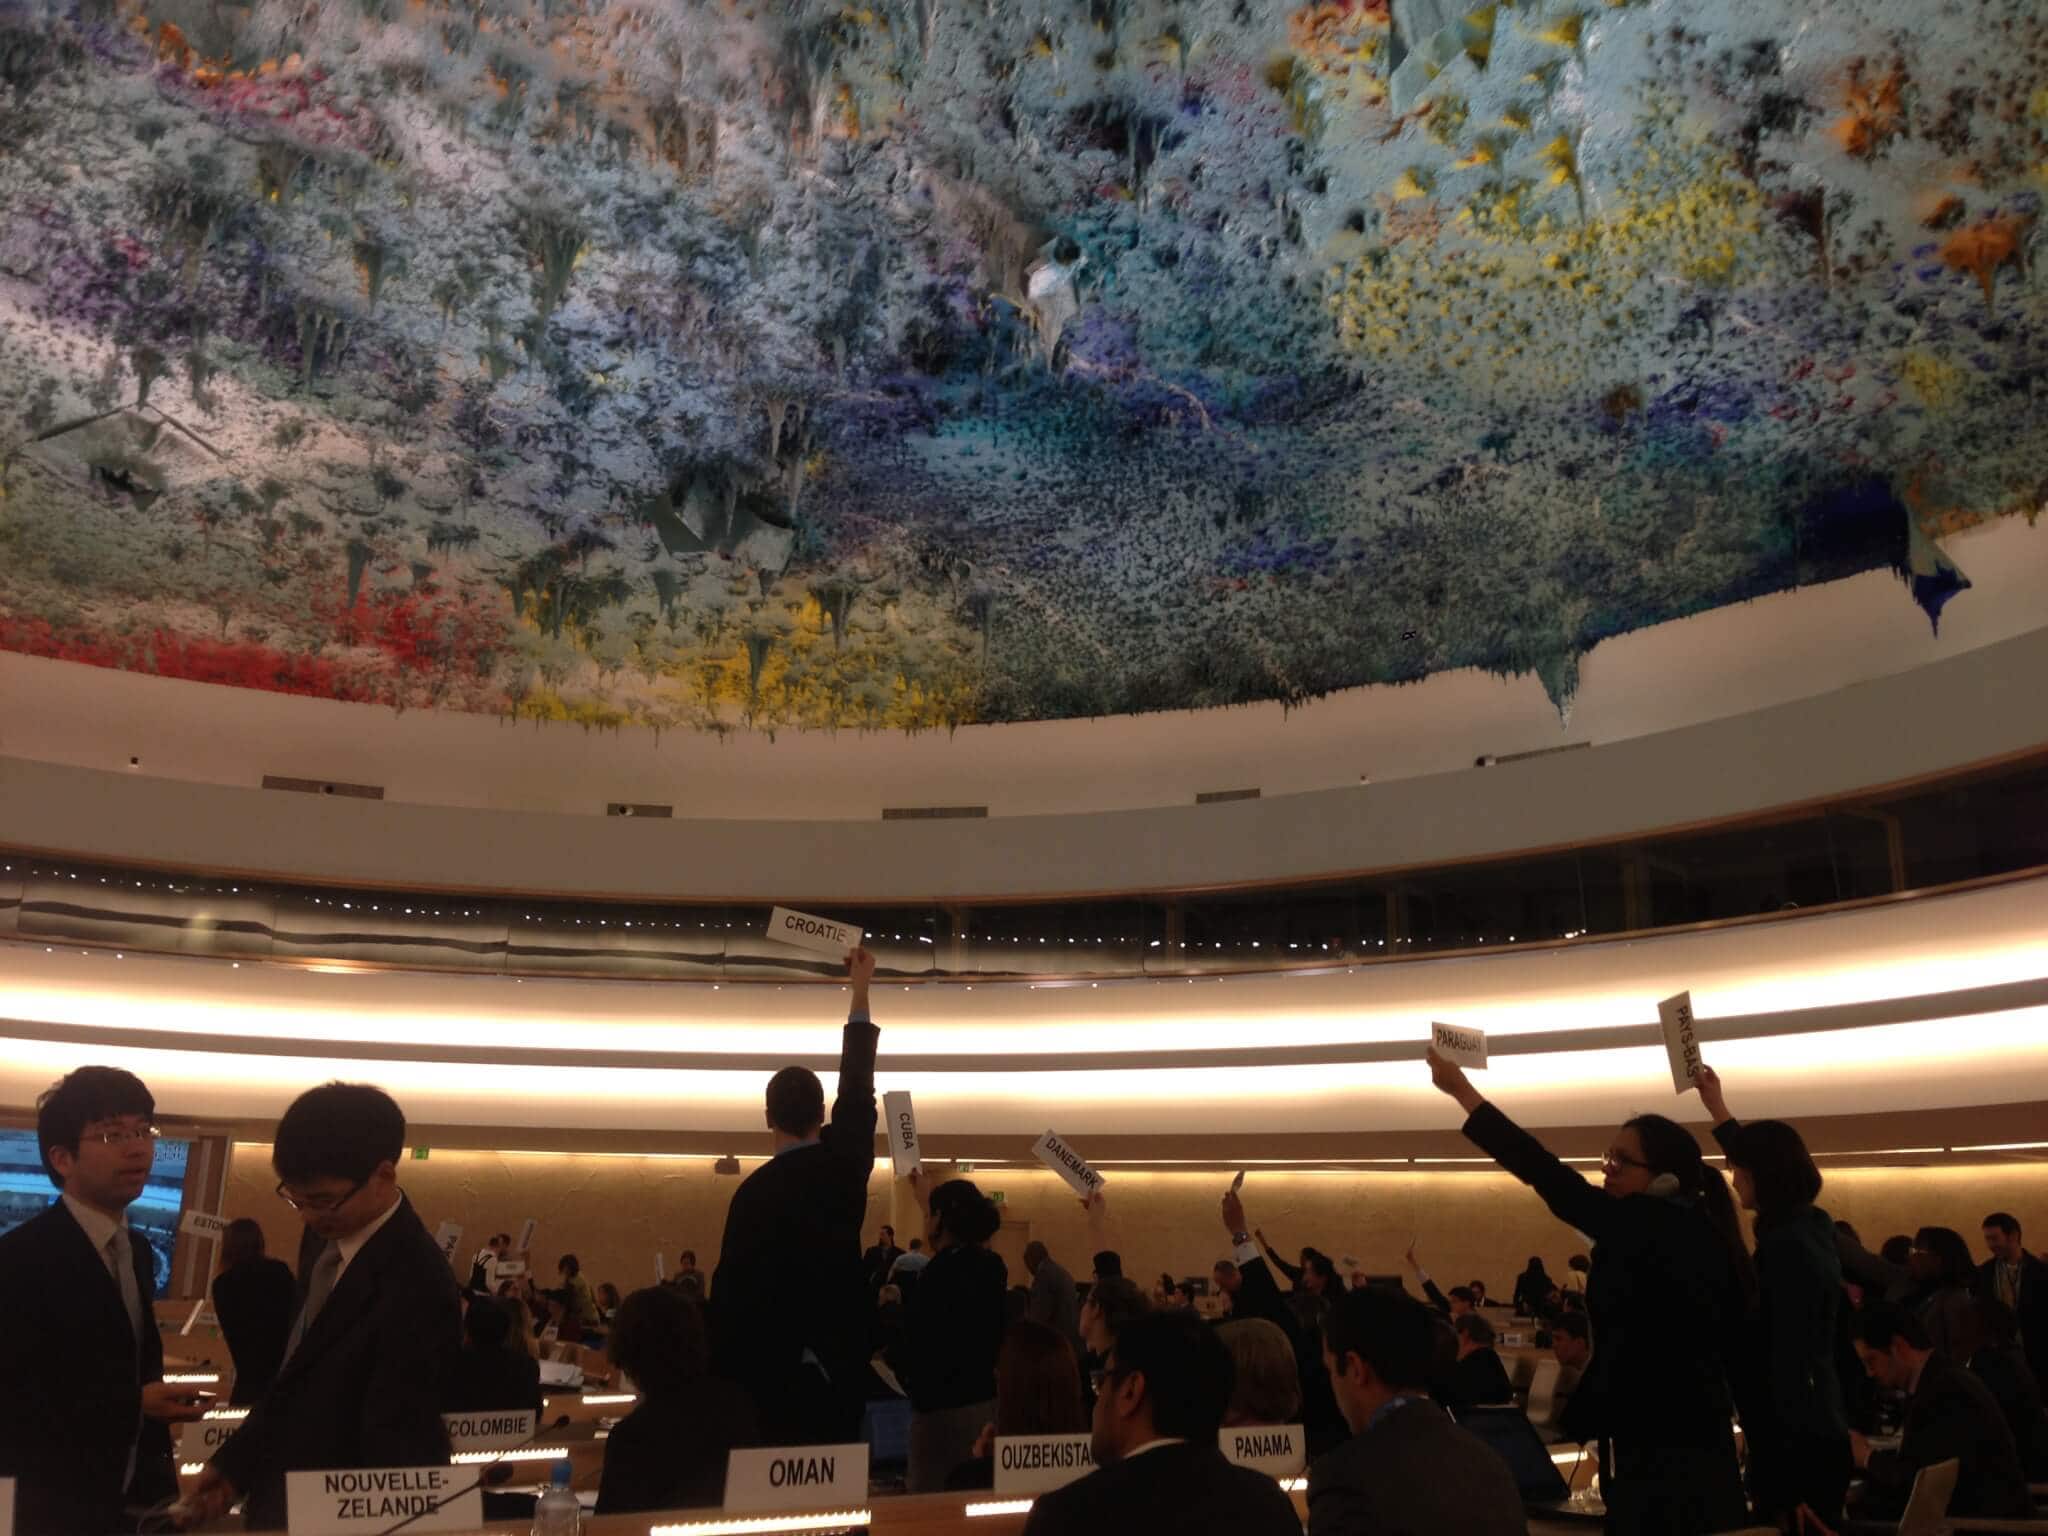 UN HRC: “Protection of the Family” a thin veil for censorship - Civic Space